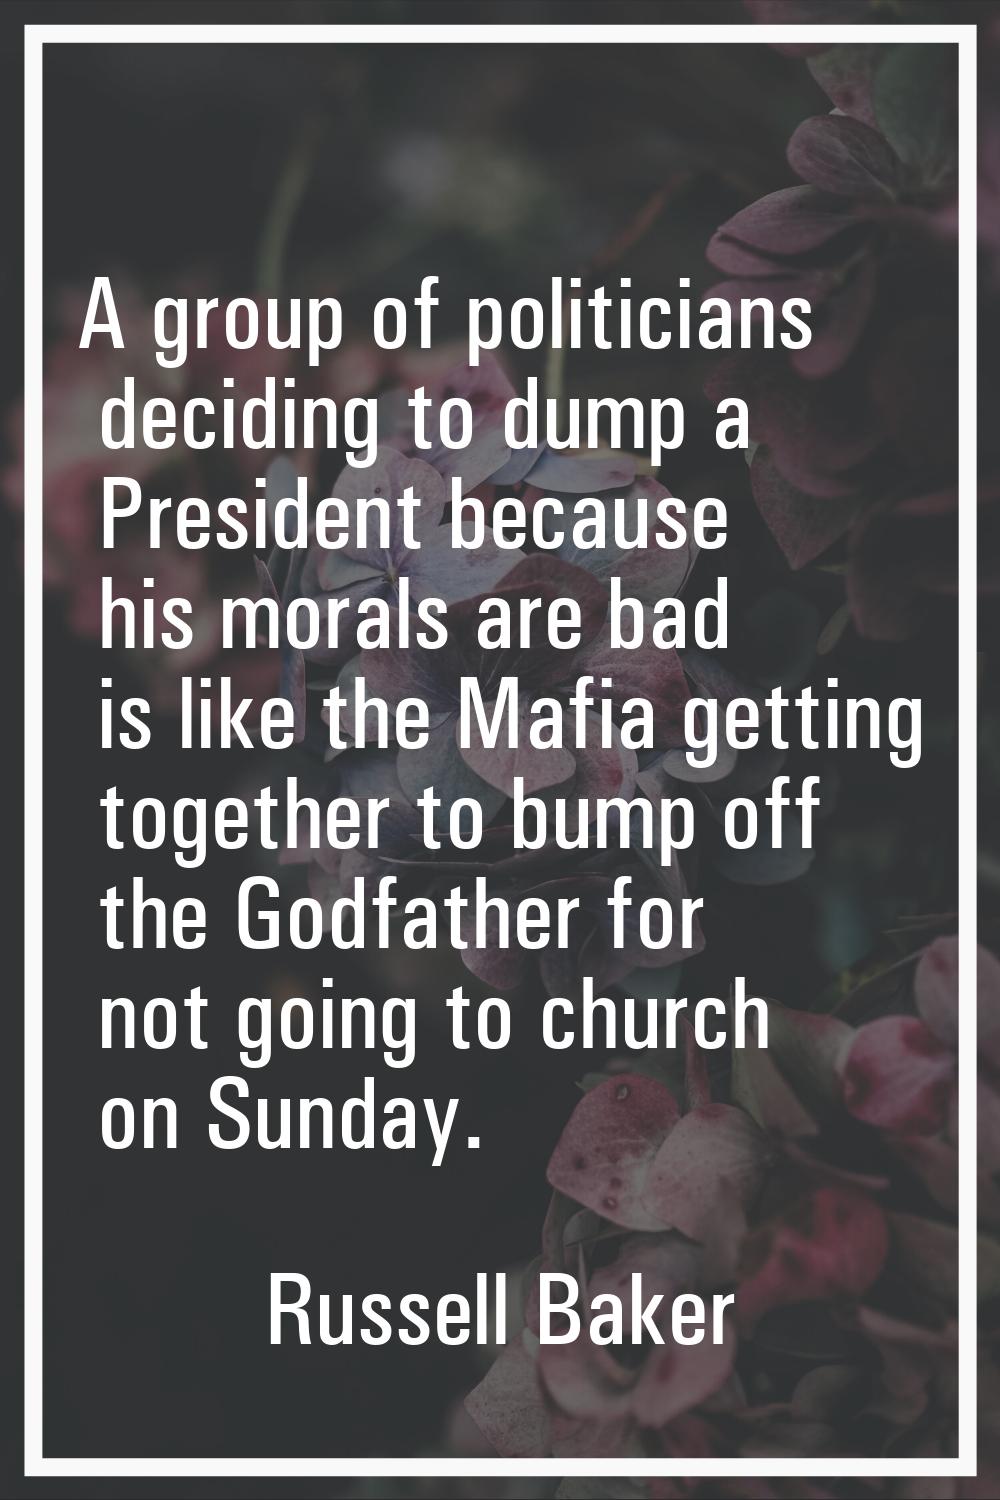 A group of politicians deciding to dump a President because his morals are bad is like the Mafia ge